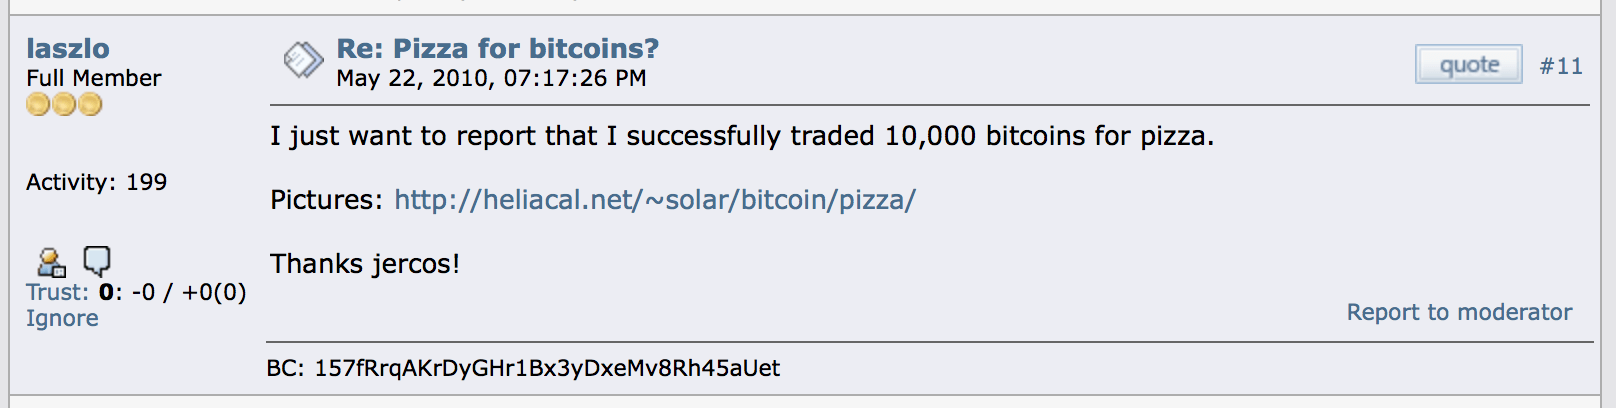 Pizza for bitcoin